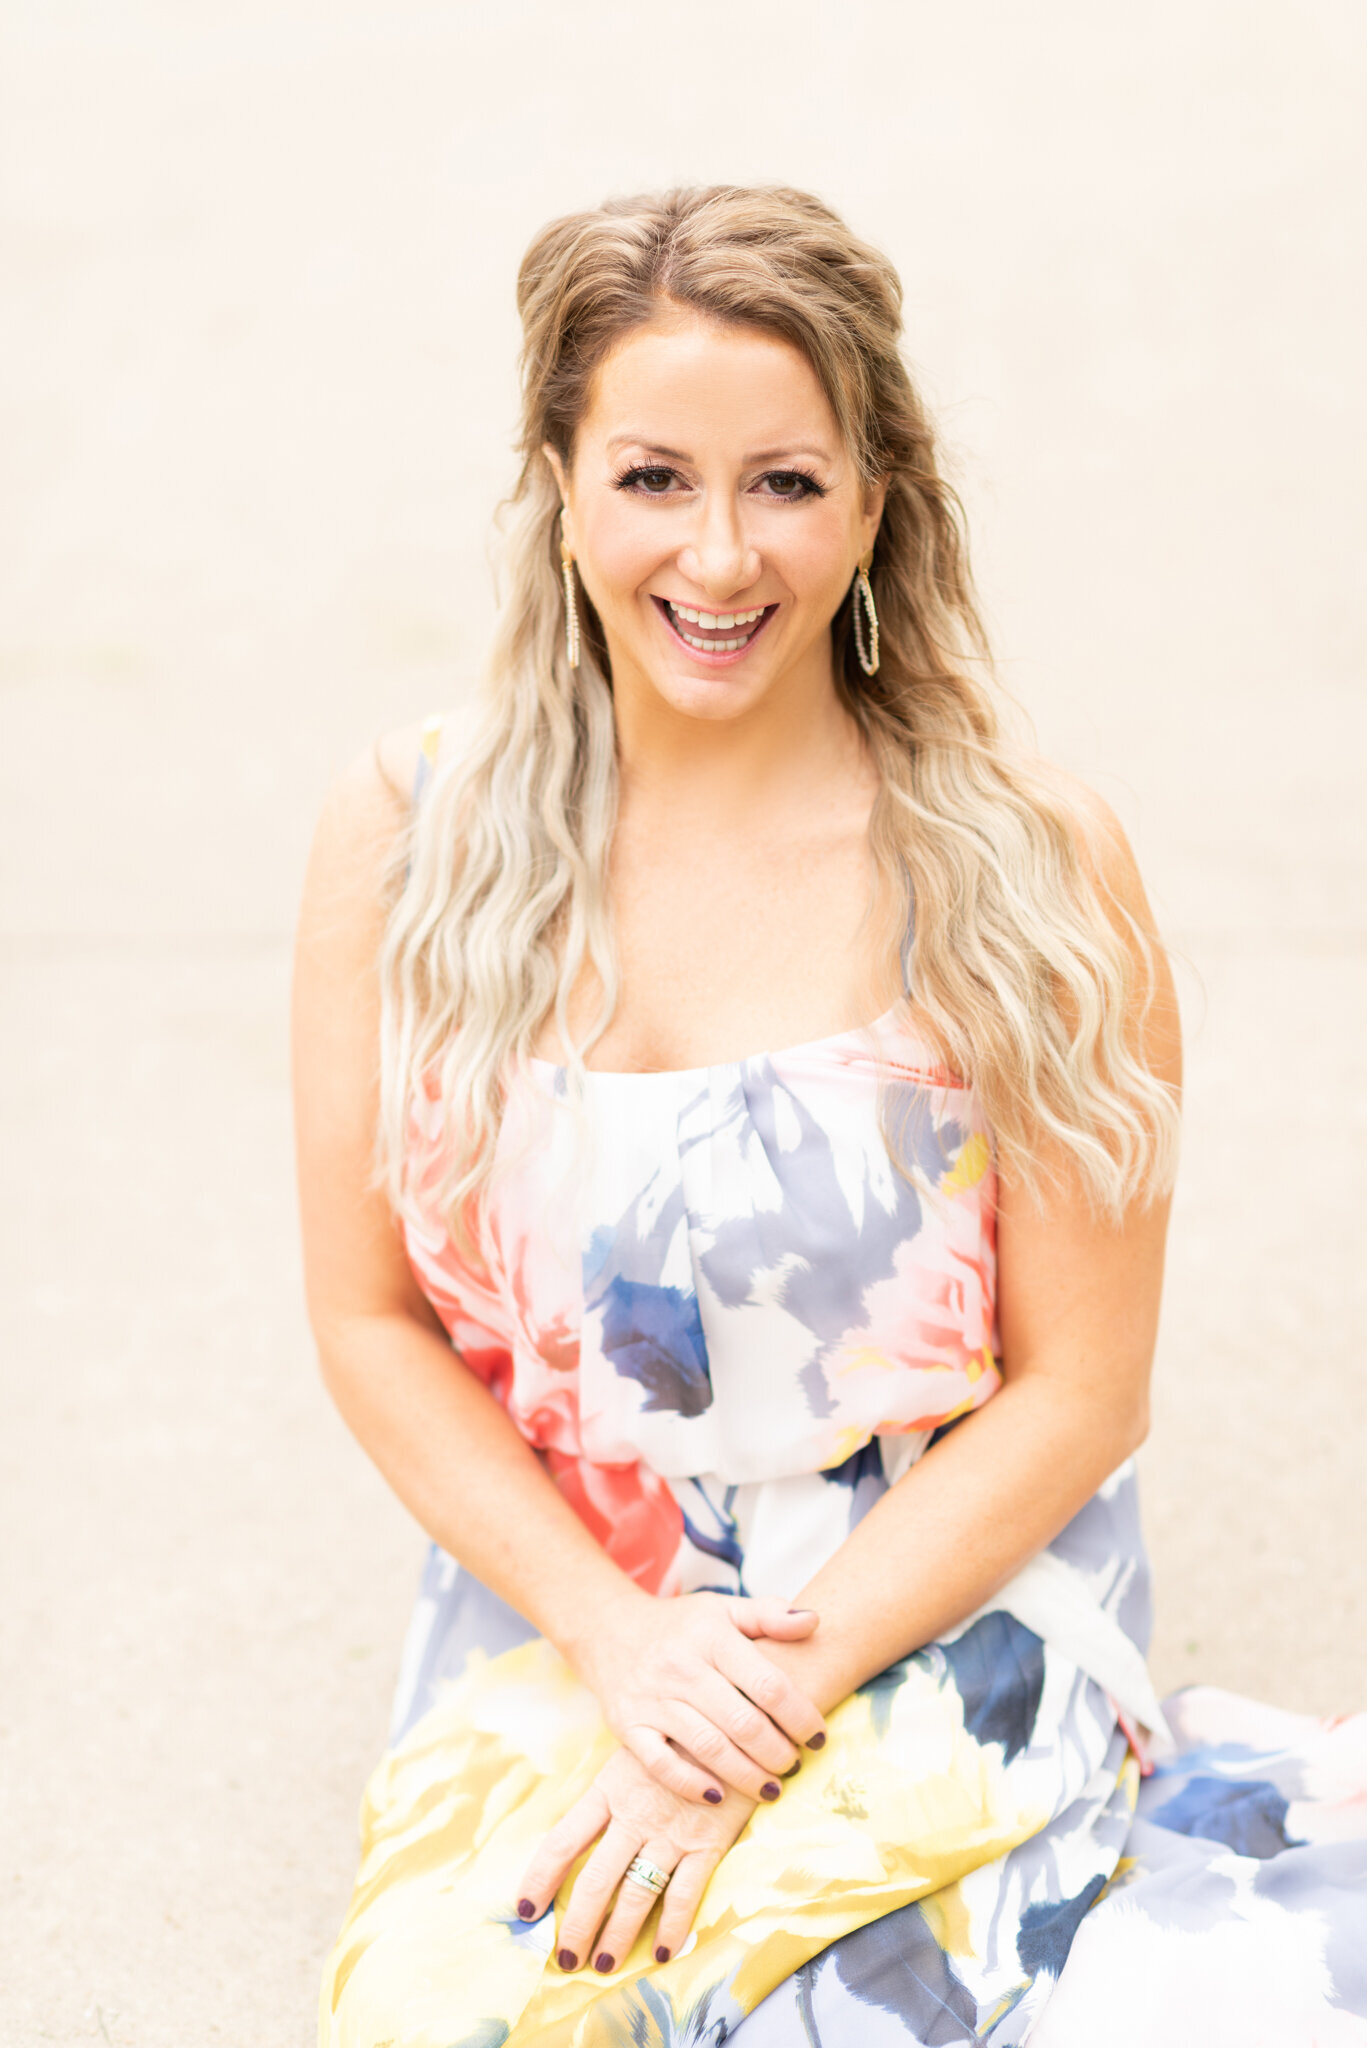 Smiling-woman-colorful-dress-personal-brand-headshot-photography